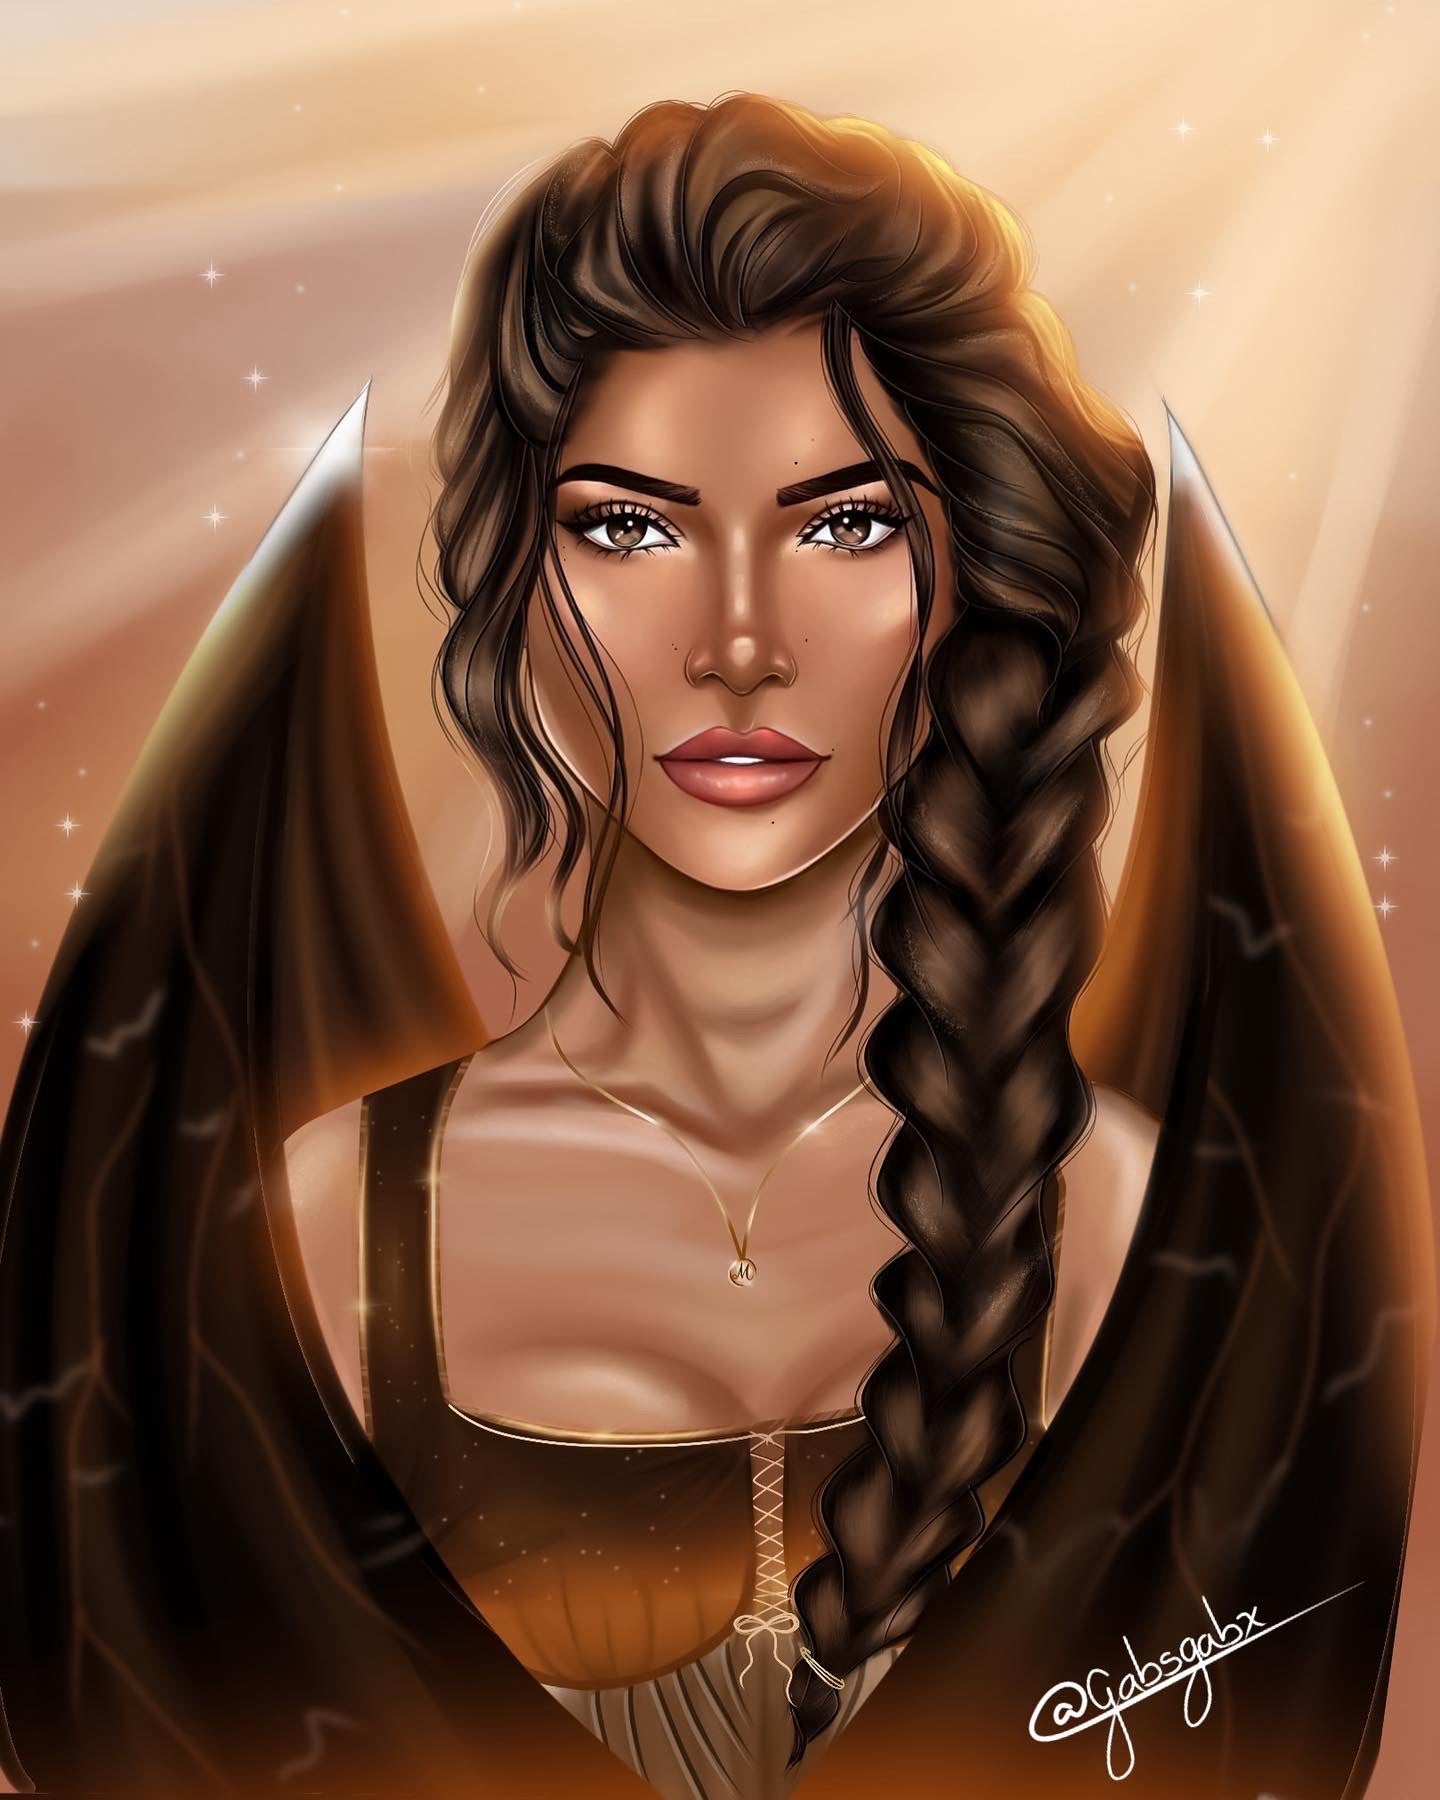 Emerie - Fan Art by @GabsGabx - A Court of Thorns and Roses Series - Stickable Acrylic Poster - Officially licensed by Sarah J. Maas - FA47